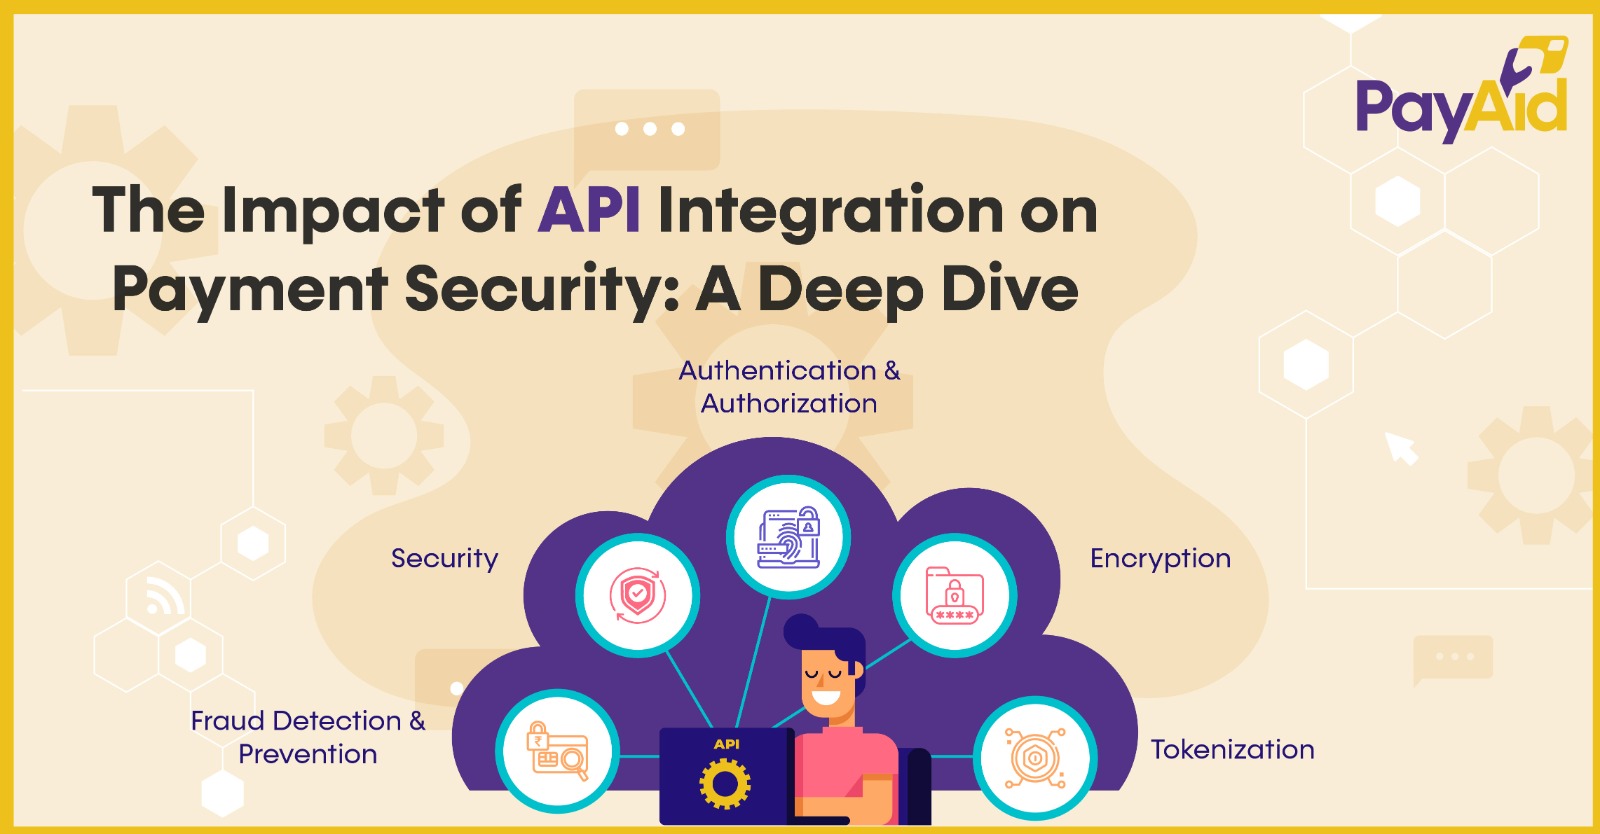 The Impact of API Integration on Payment Security